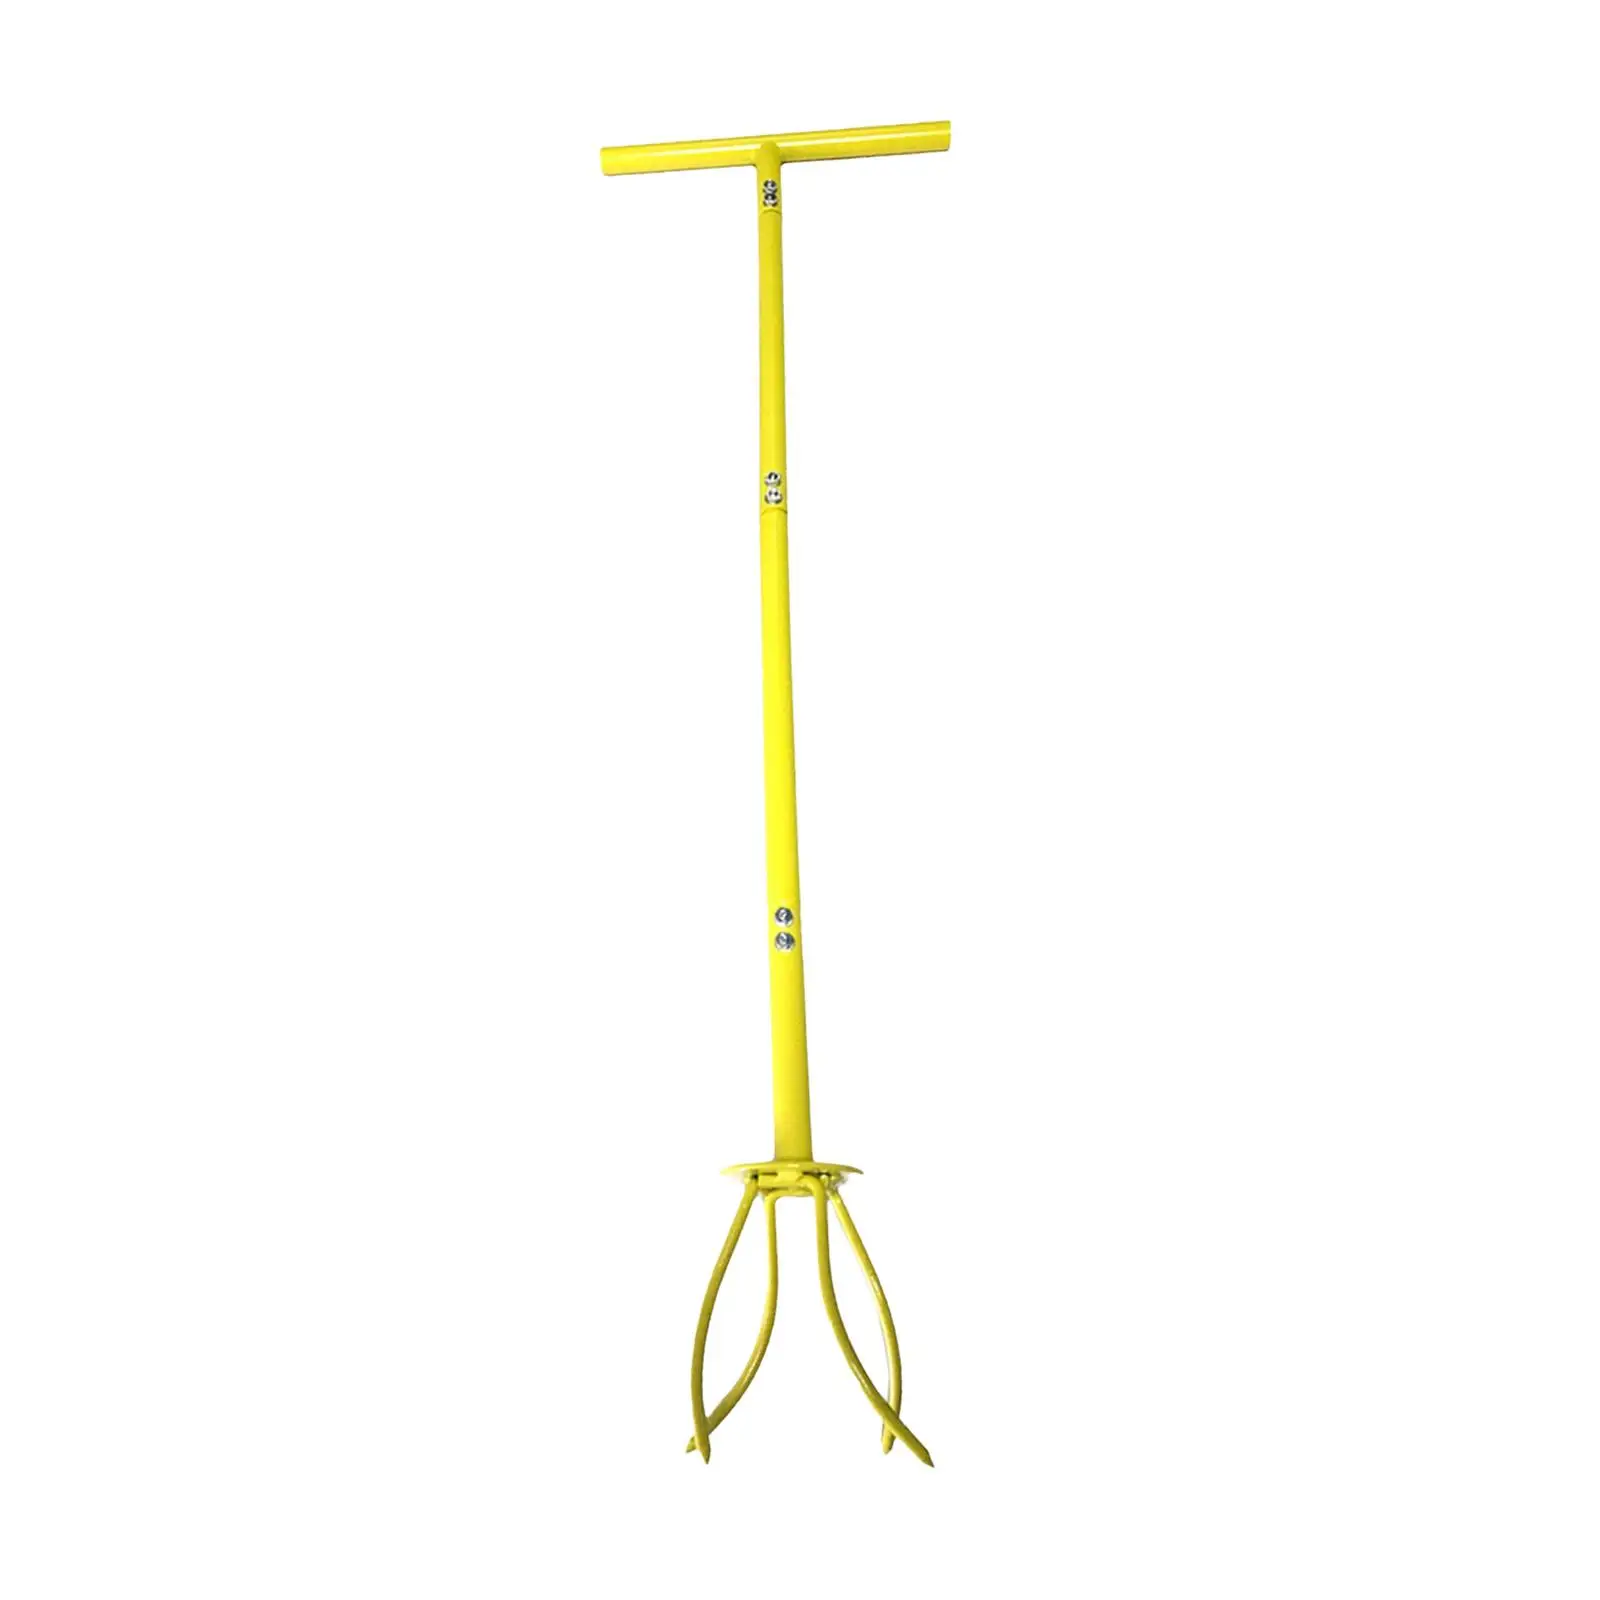 Manual Hand Tiller for Narrow and Wide Areas Rugged Detachable Durable T Shaped Handle Manual Soil Grabber Twist Tiller